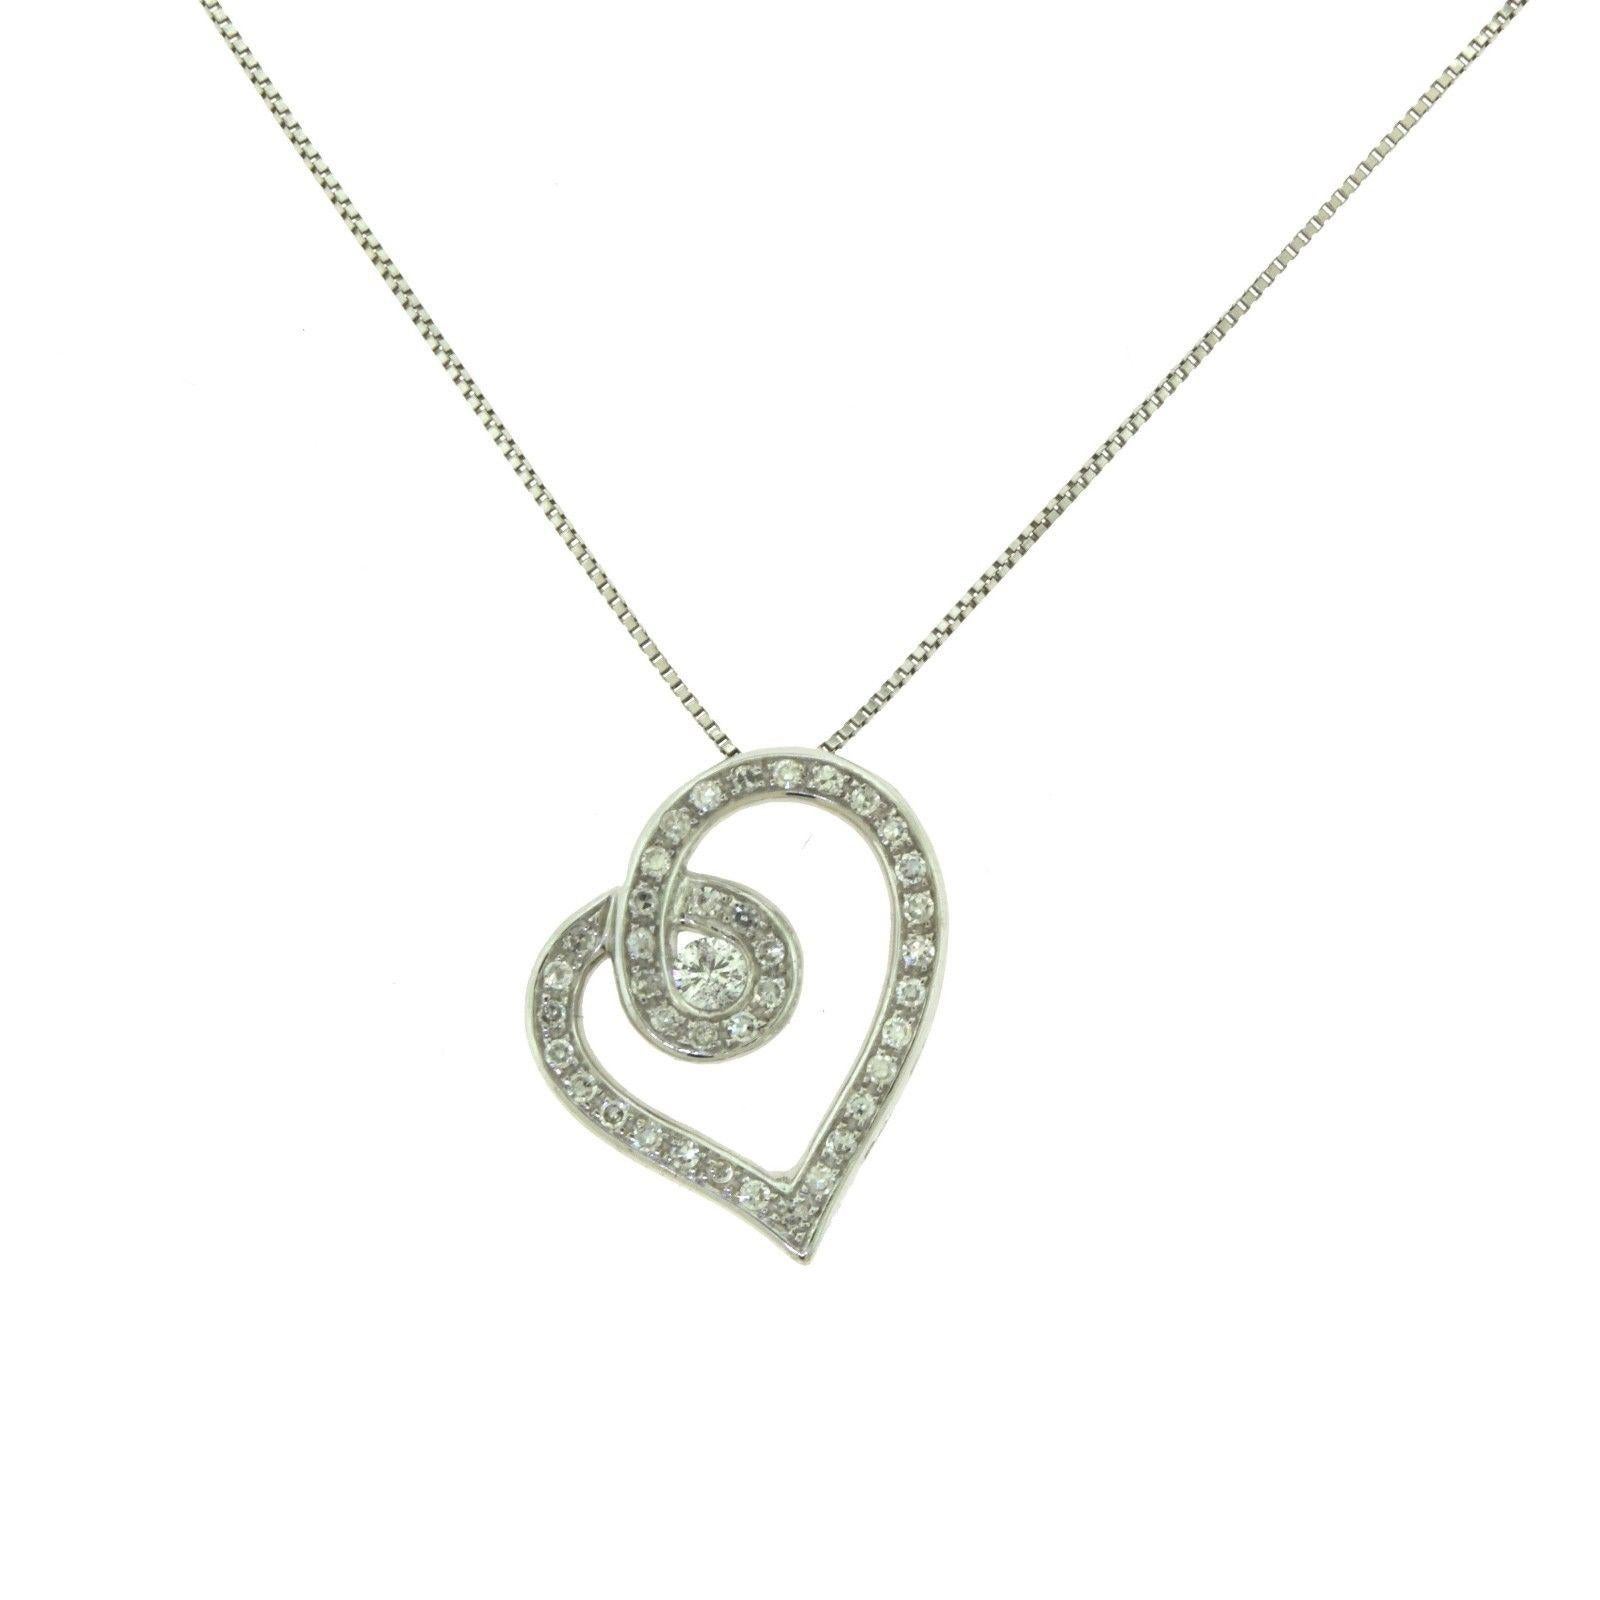 Brilliance Jewels, Miami
Questions? Call Us Anytime!
786,482,8100

Style: Open Heart Pendant Necklace
Metal: White Gold

Metal Purity: 10k

Stones: Round Diamonds

Diamond Color: F

Diamond Clarity: VS

Total Carat Weight: 0.75 ct 

Total Item